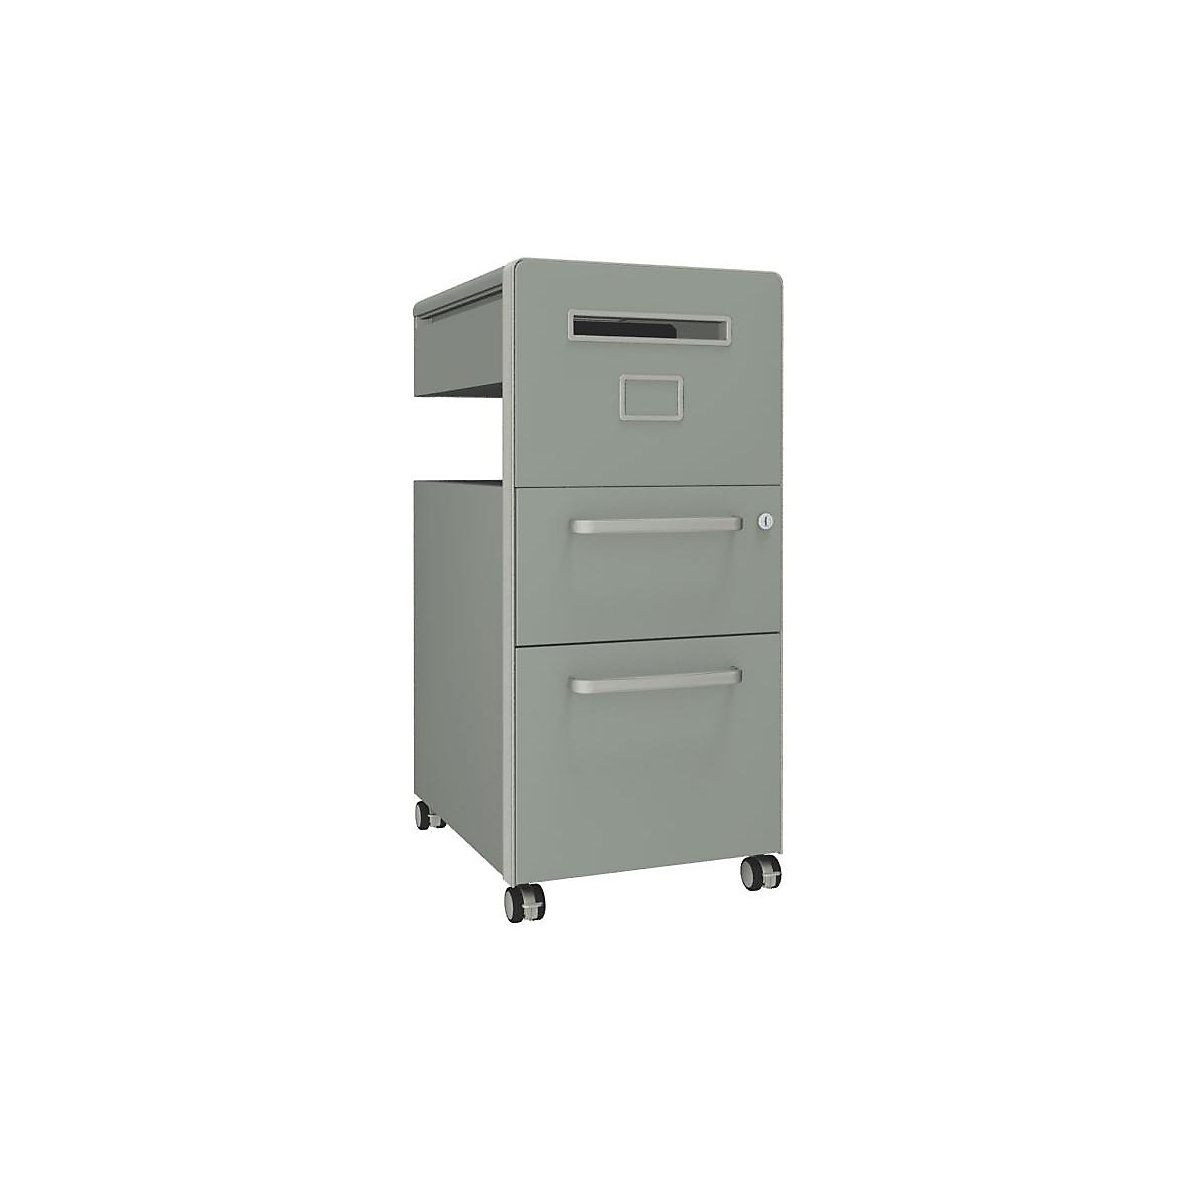 Bite™ pedestal furniture, with 1 whiteboard, opens on the right side – BISLEY, with 1 universal drawer, 1 suspension file drawer, york-25